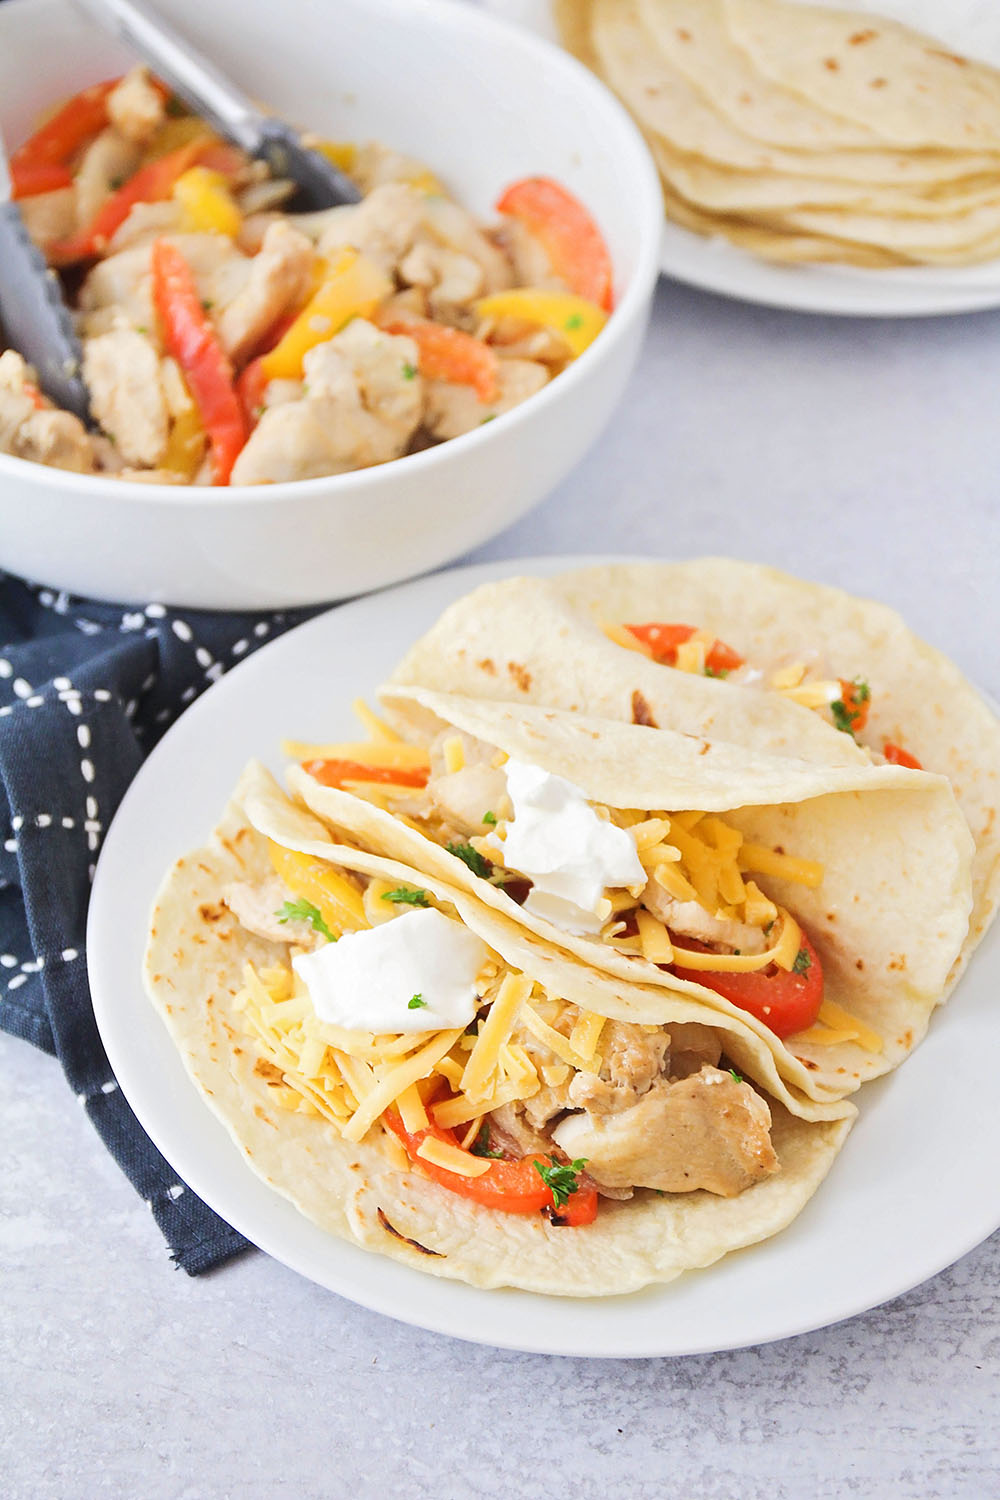 These sheet pan chicken fajitas are simple to make, and bursting with delicious flavors. It's an easy weeknight meal that's sure to please!